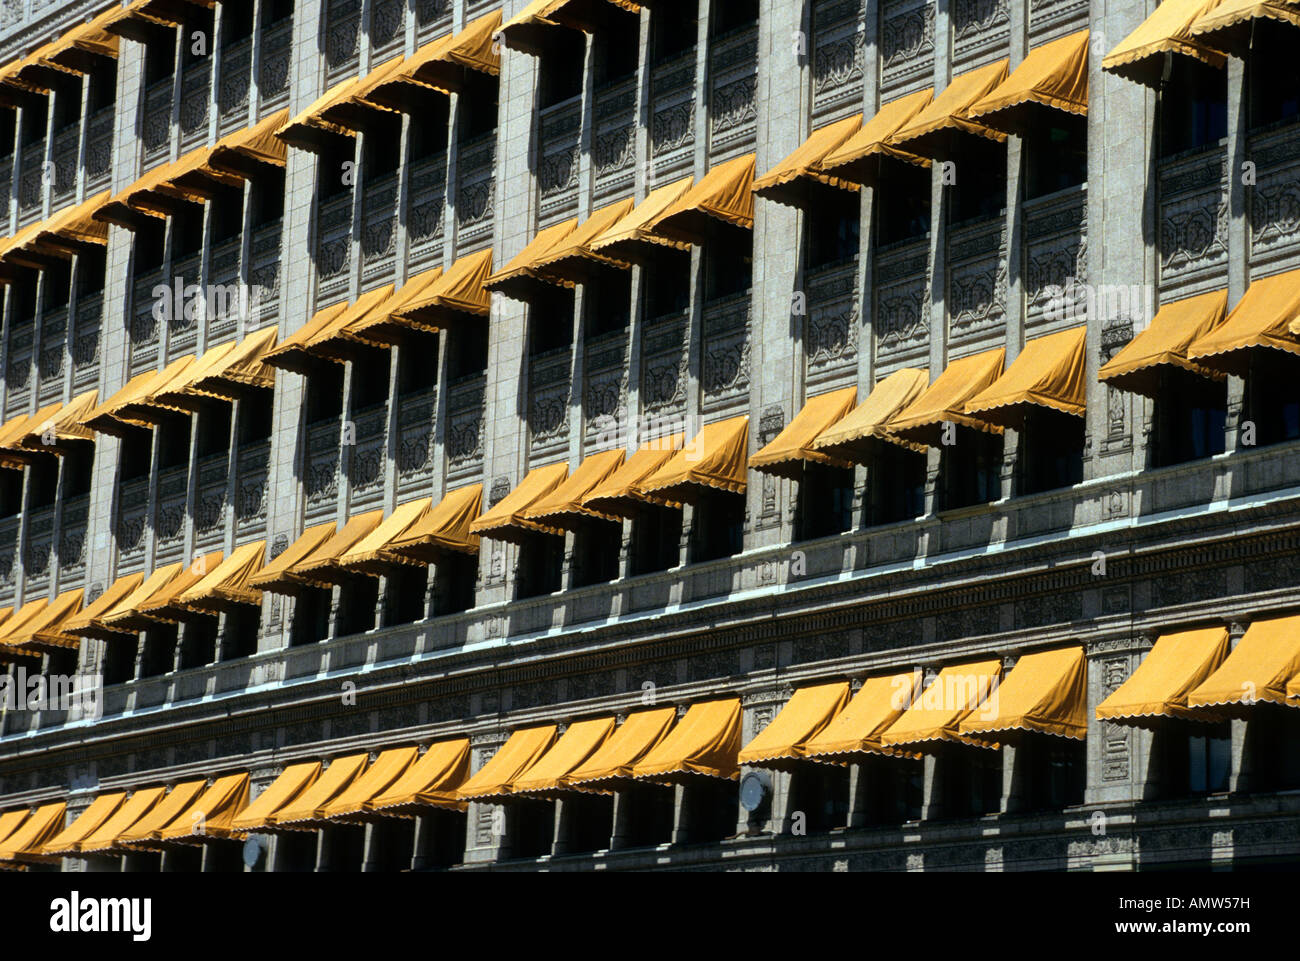 YELLOW AWNINGS ON THE HAMM BUILDING IN DOWNTOWN ST. PAUL, MINNESOTA. Stock Photo